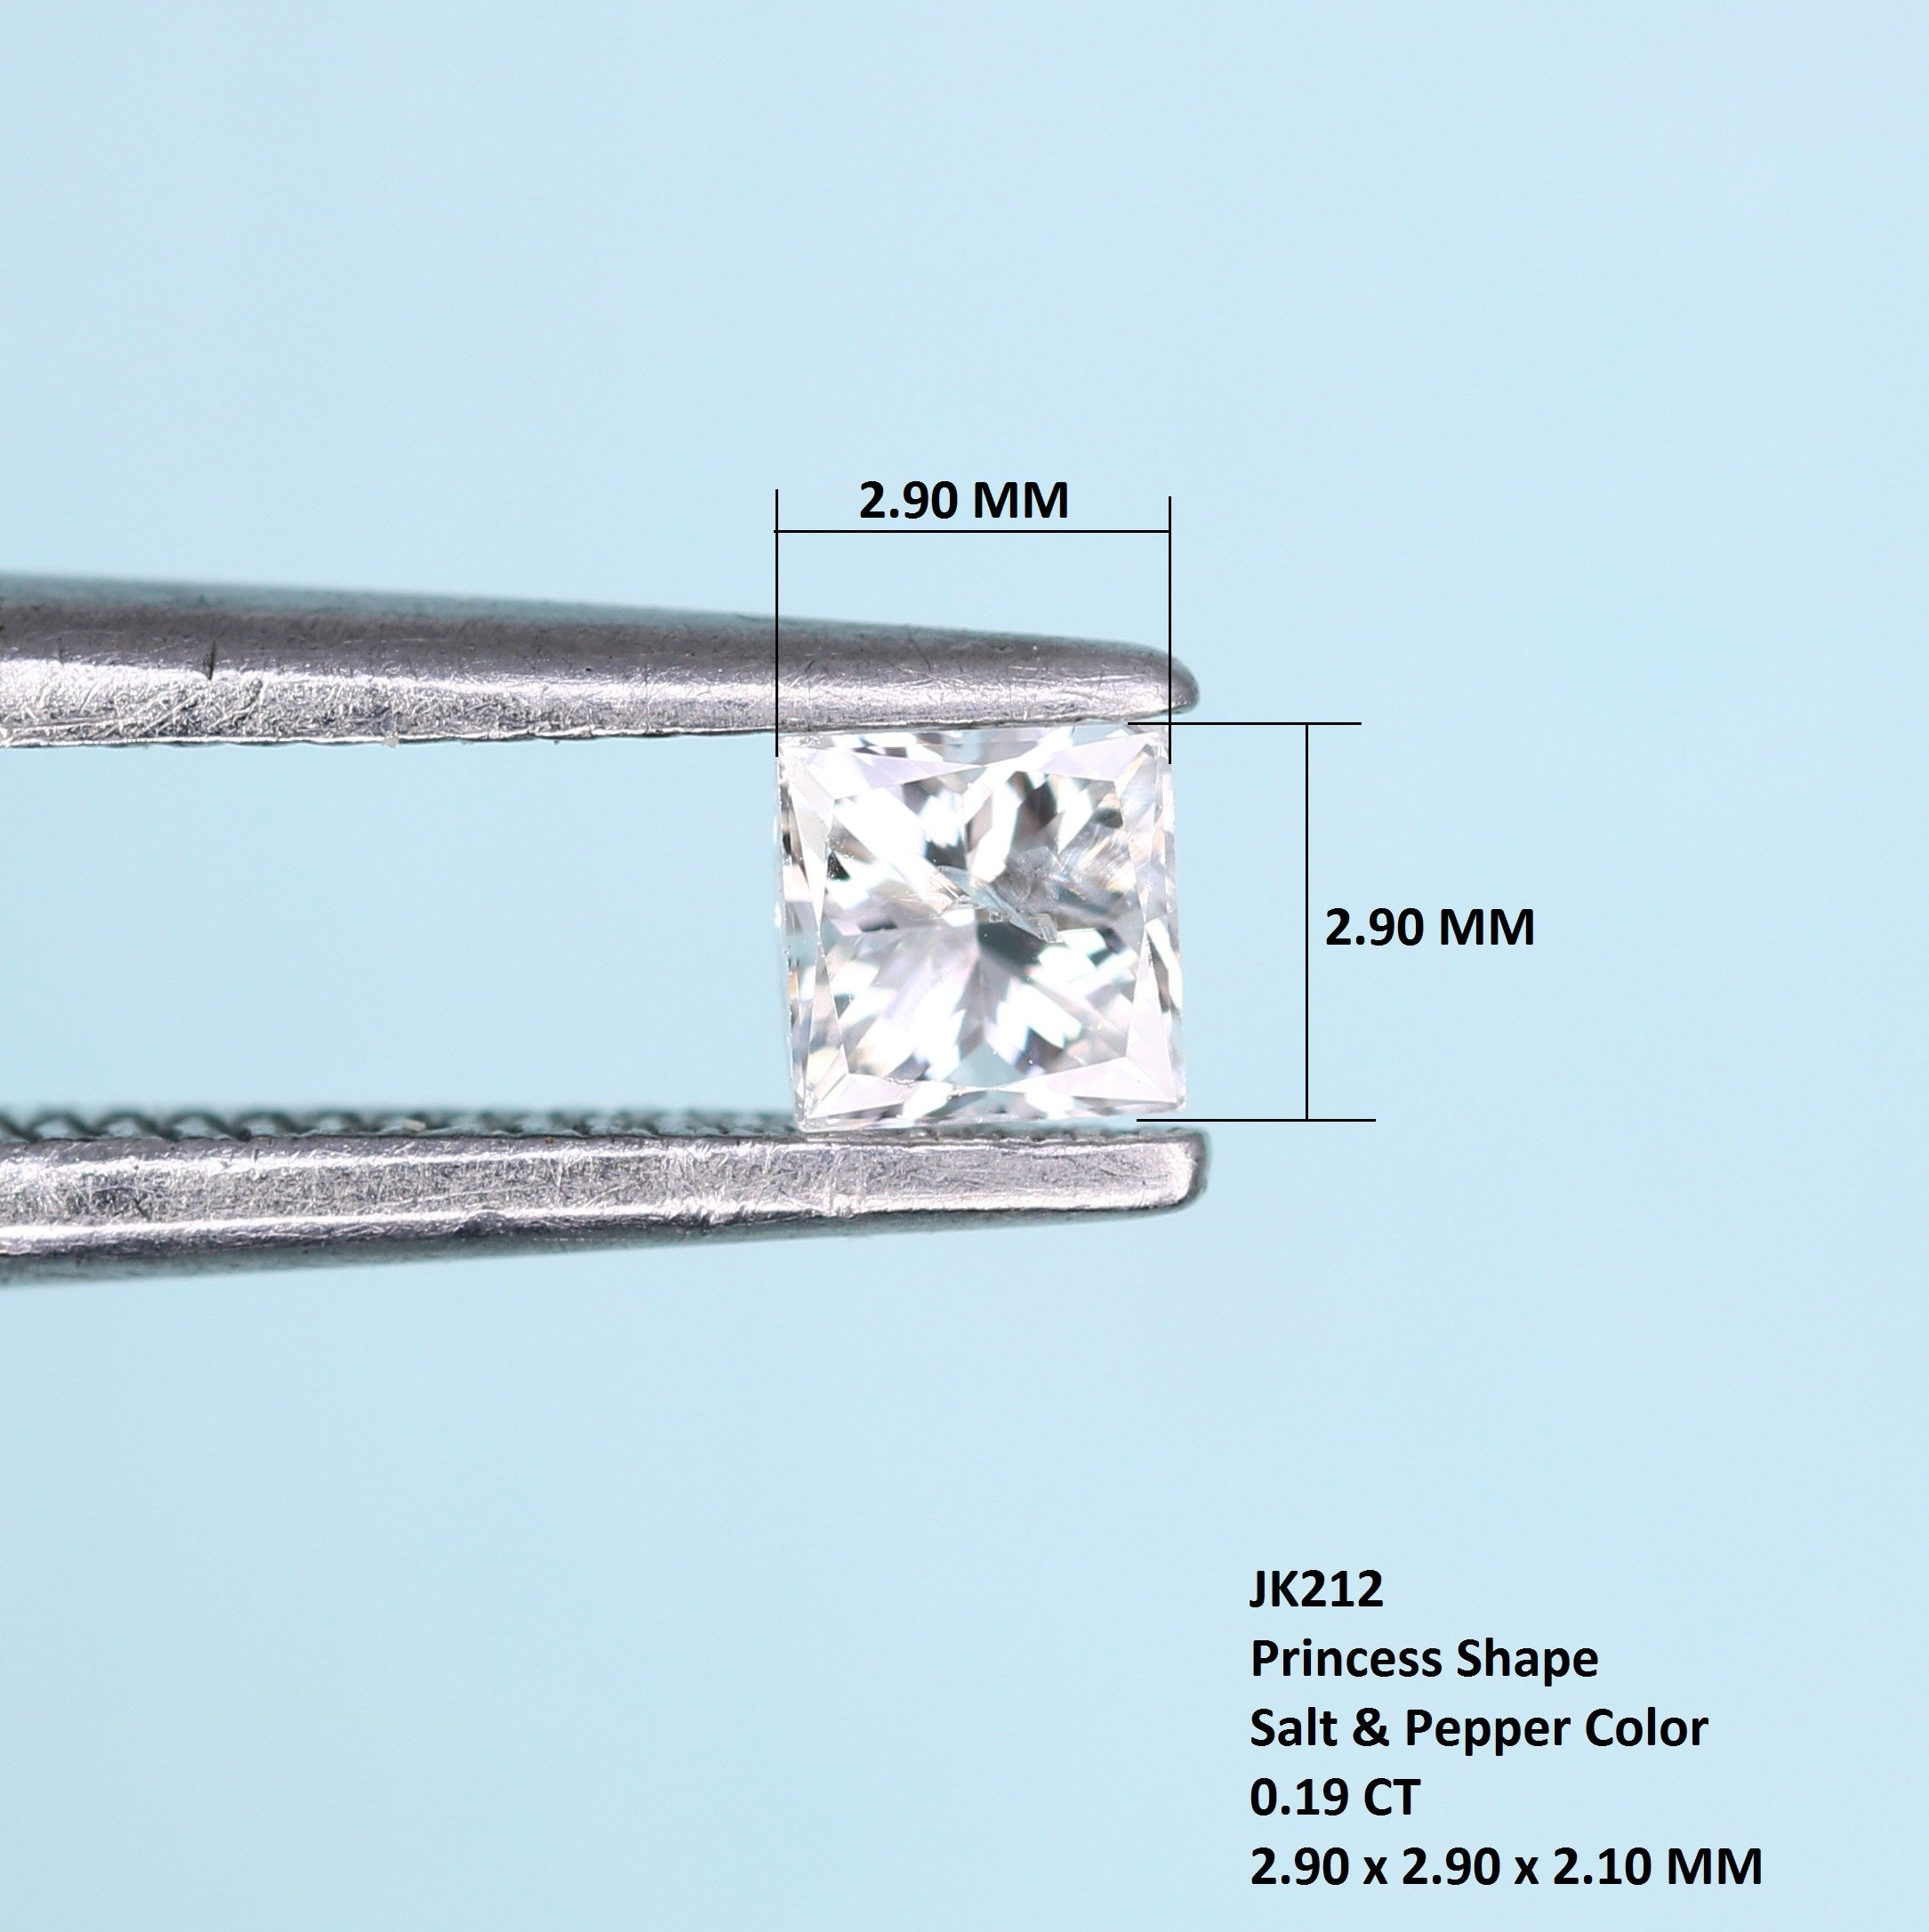 0.19 CT Salt And Pepper Princess Shape Diamond For Engagement Ring